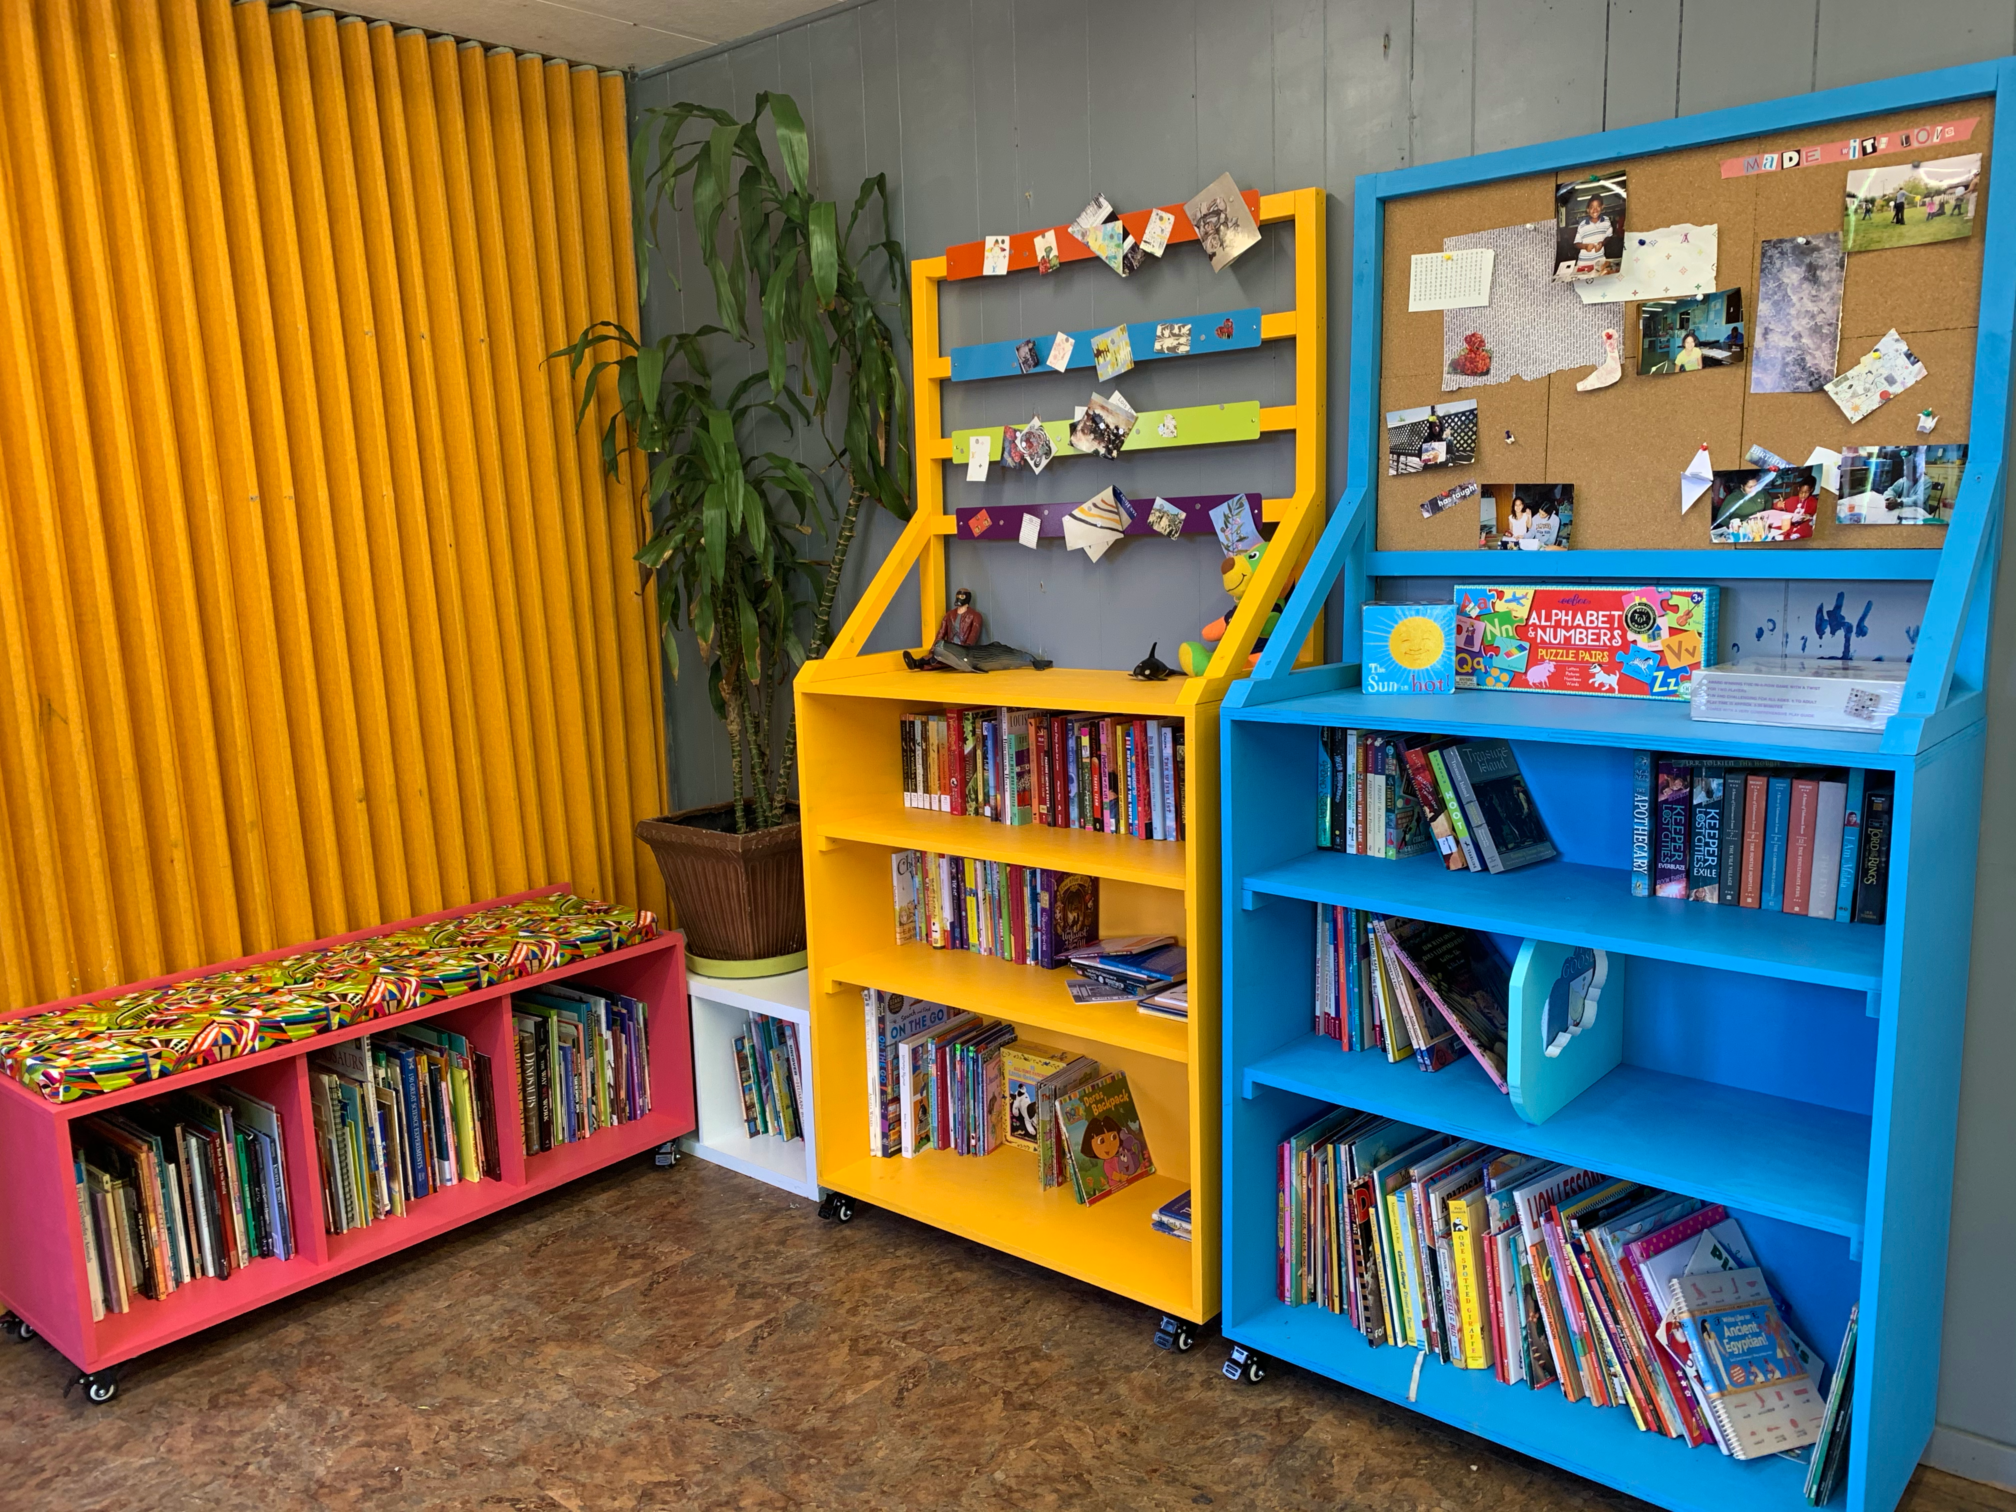 Library Space built by teens in Girls Garage